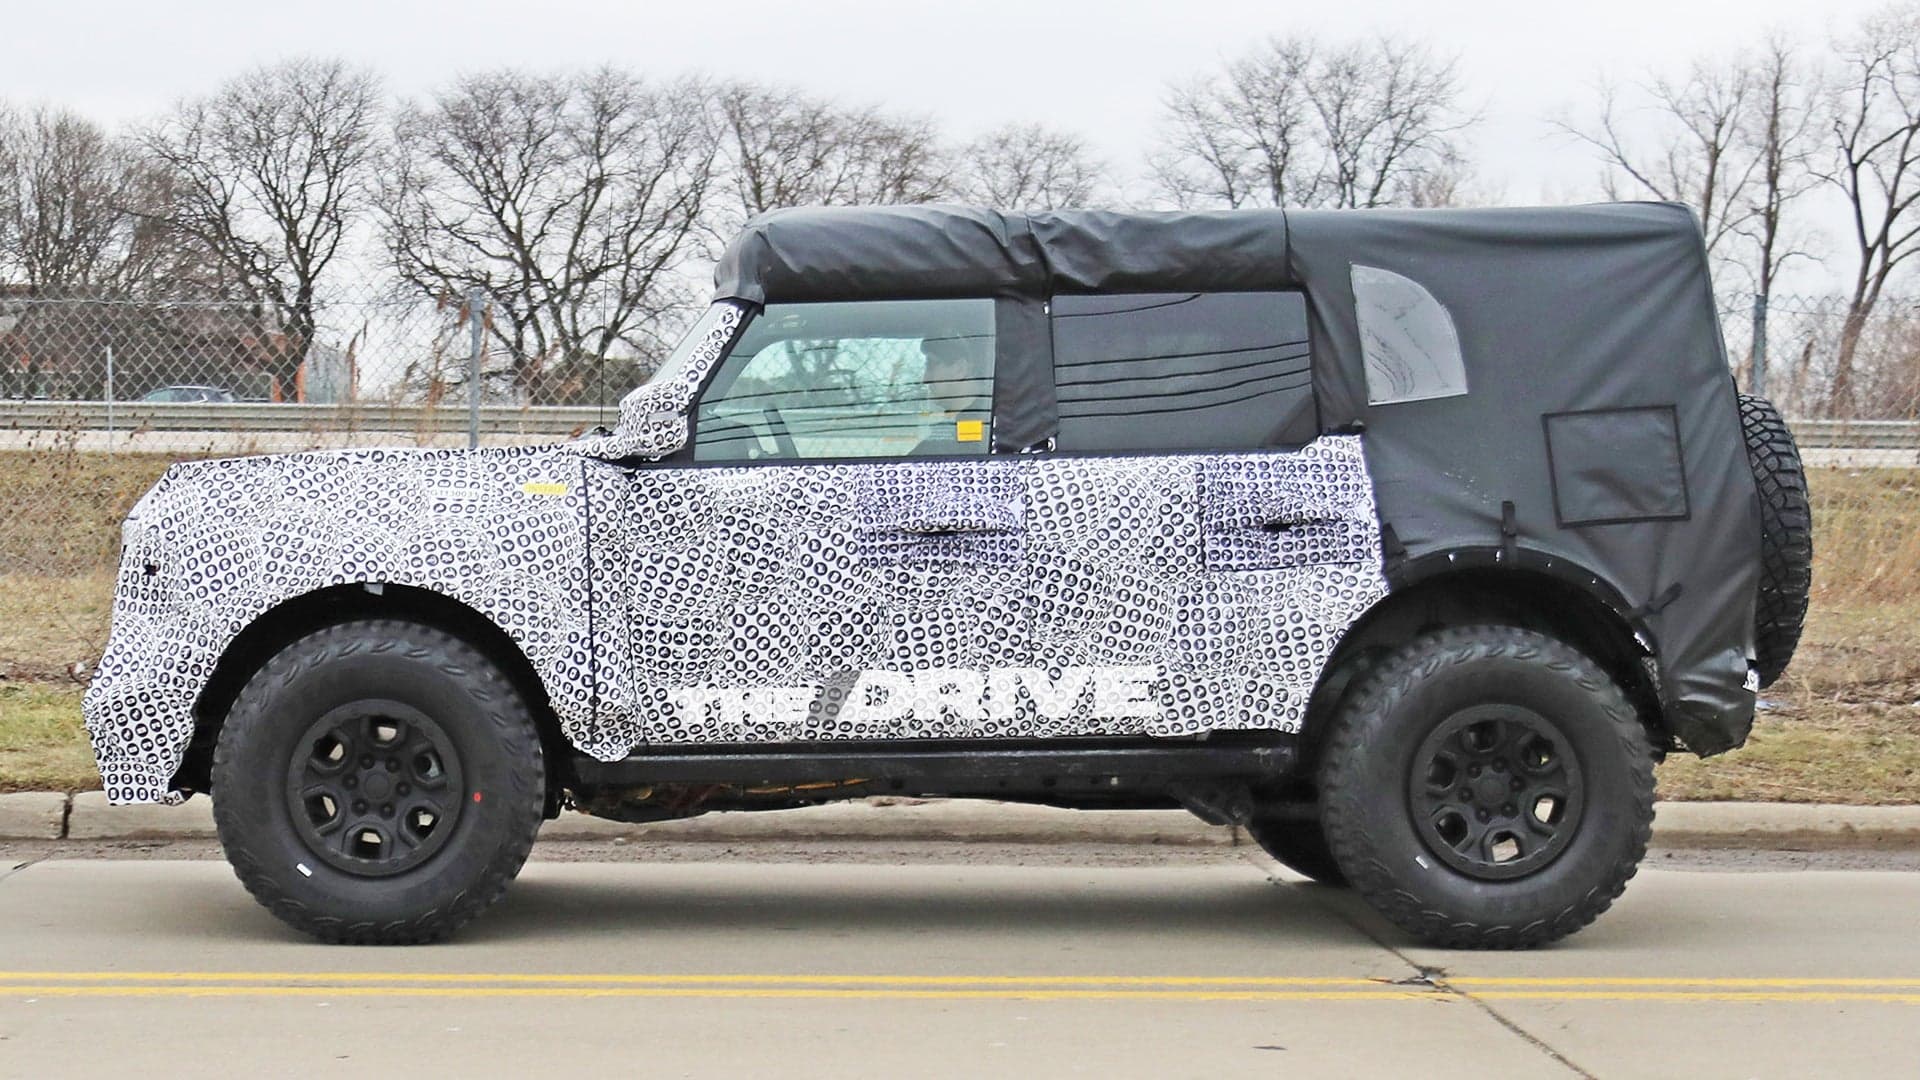 2021 Ford Bronco’s 7-Speed Manual Transmission Will Have Ultra-Low Crawling Gear: Report